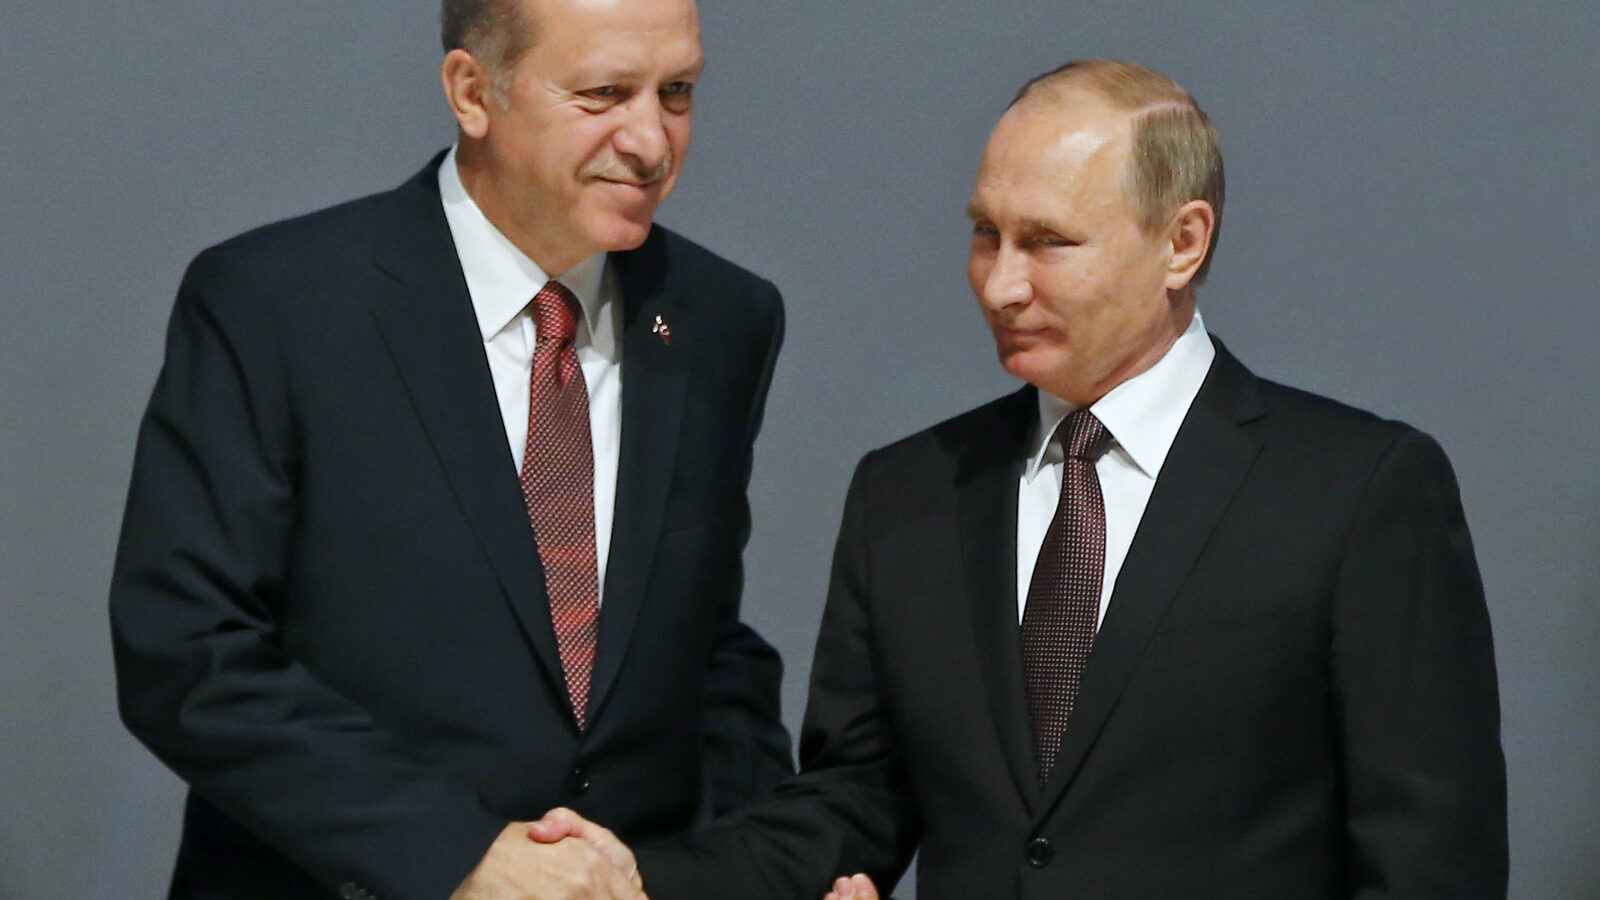 In this Oct. 10, 2016 photo, Turkey's President Recep Tayyip Erdogan, left and Russian President Vladimir Putin, shake hands following the group photo at the World Energy Congress, in Istanbul, Turkey. (AP/Emrah Gurel, File)